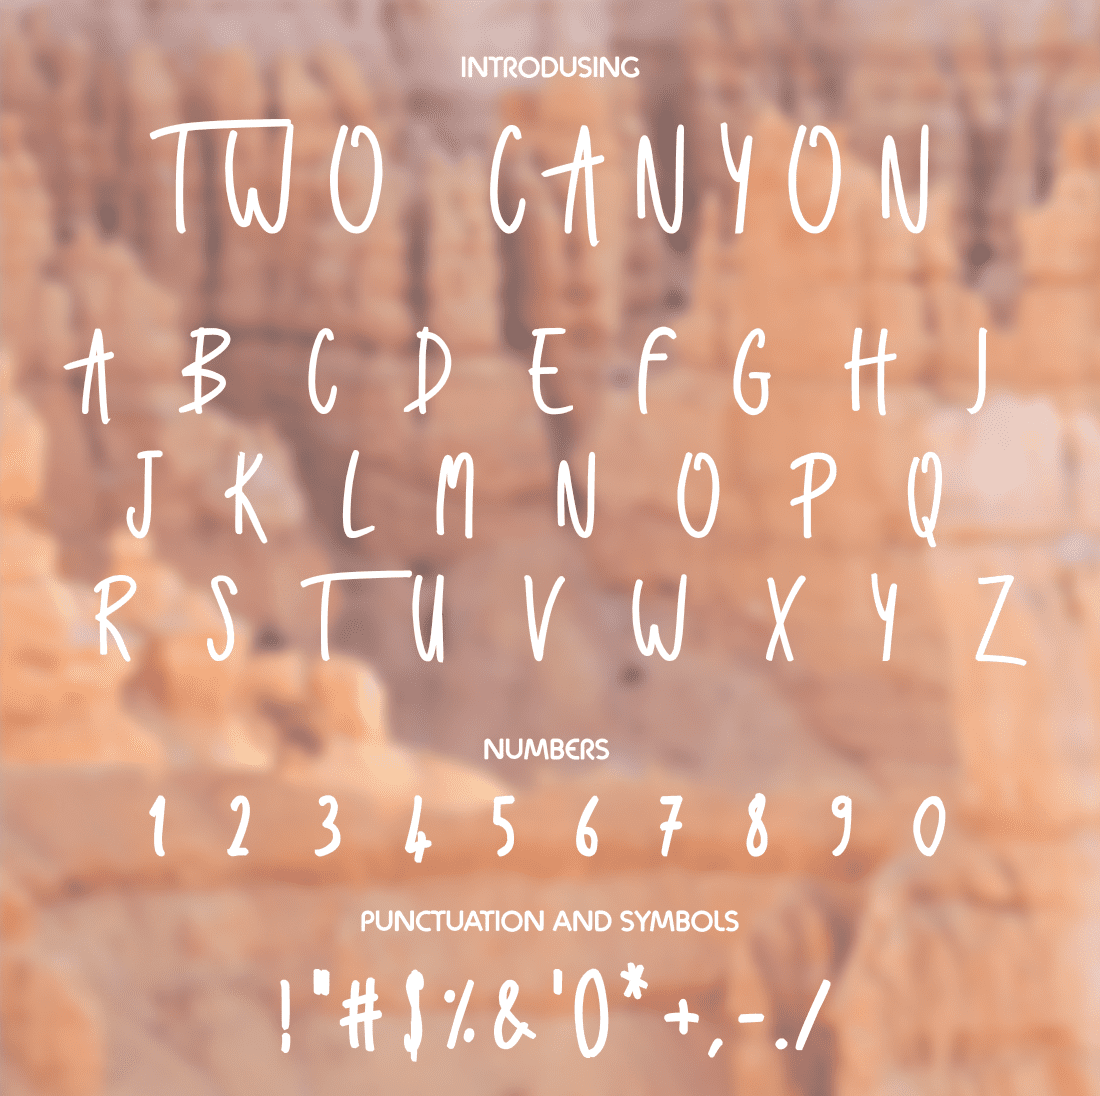 Two Canyon Font - main image preview.